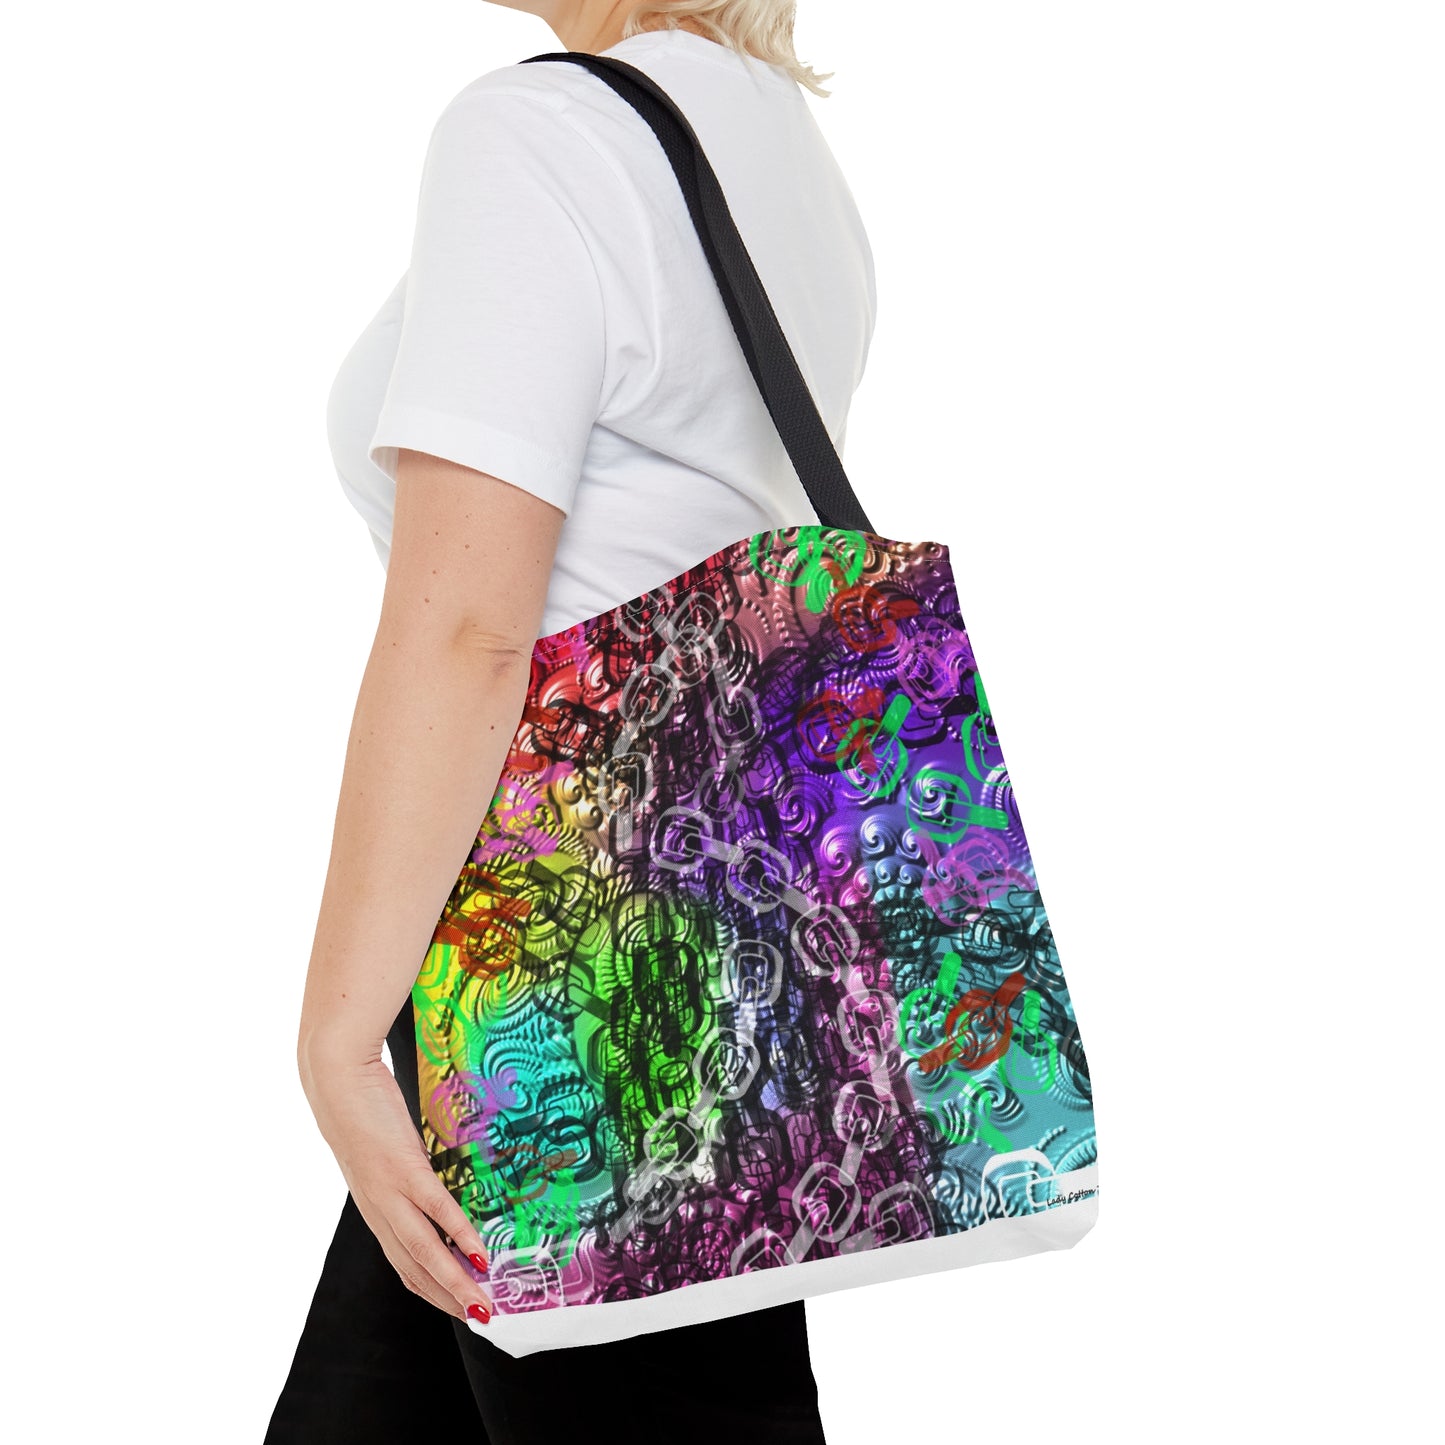 Nature in chains art Tote Bag